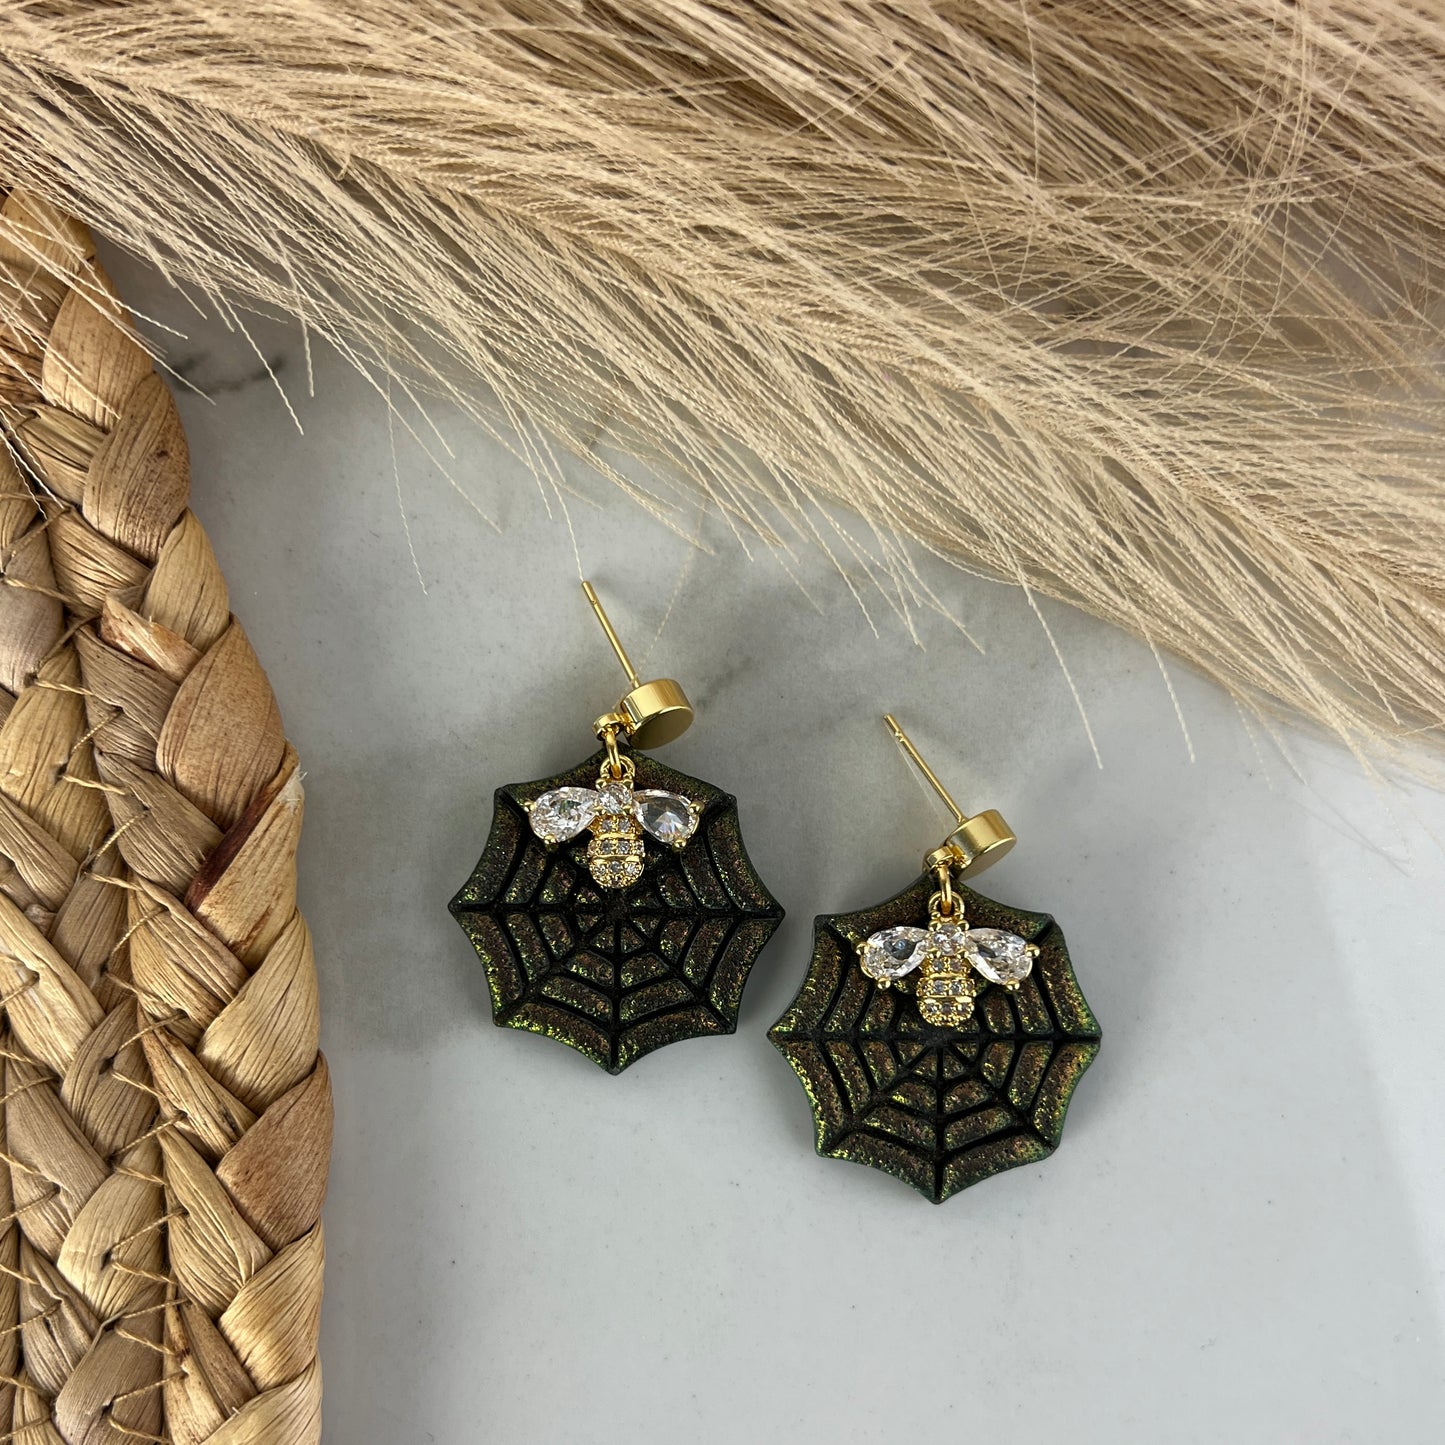 Bee in Spider Web Day and Night Halloween/ Fall Collection